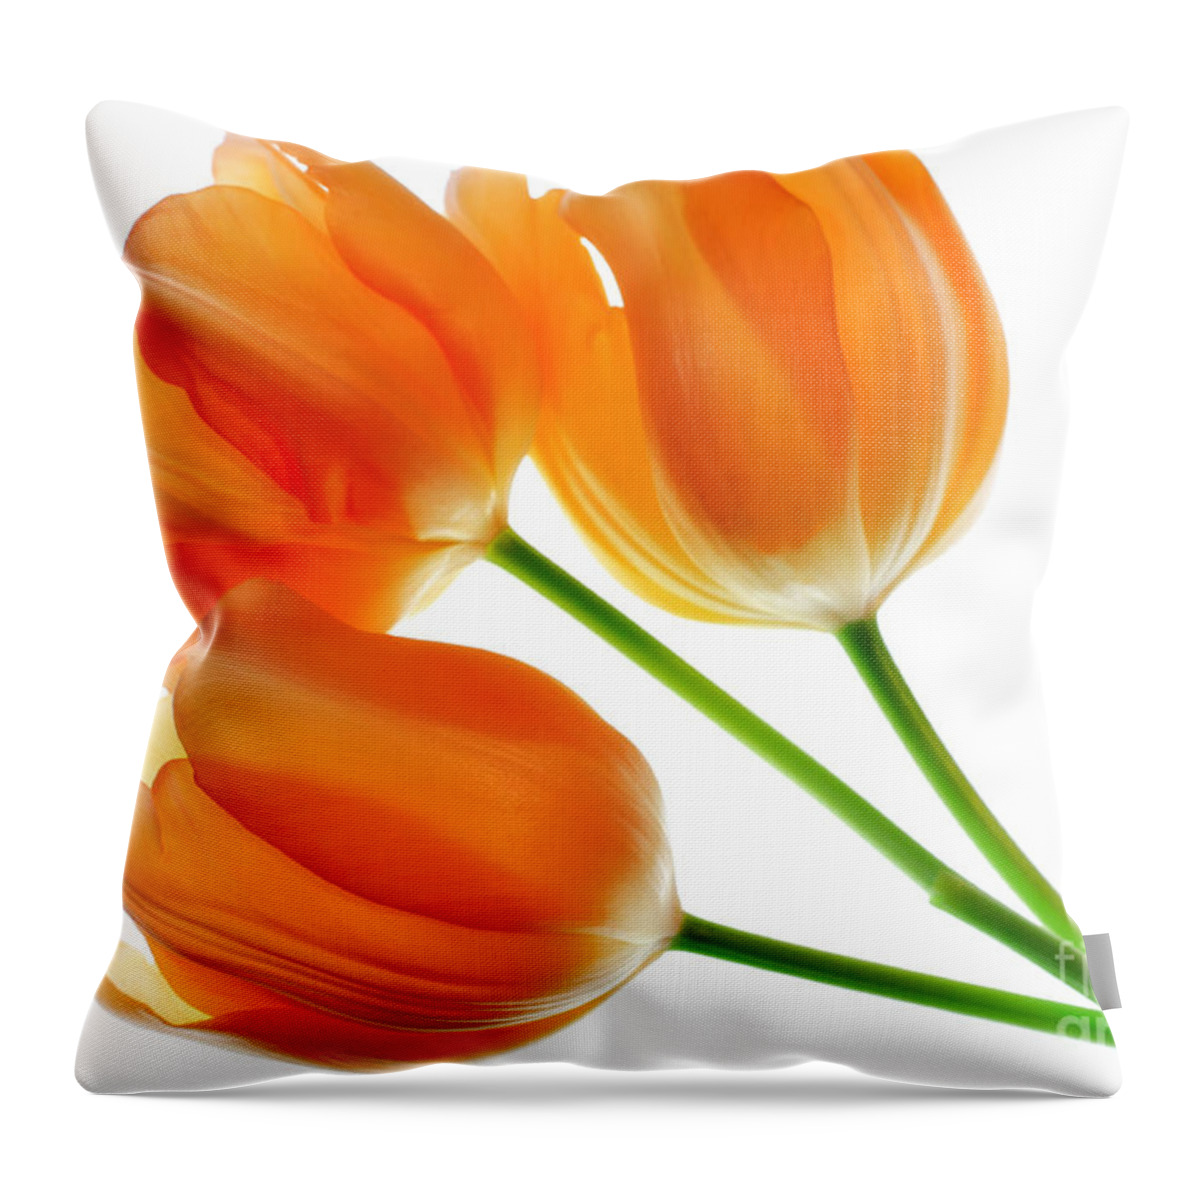 Tulip Throw Pillow featuring the photograph Three Orange Tulip Flowers 1 by Charline Xia